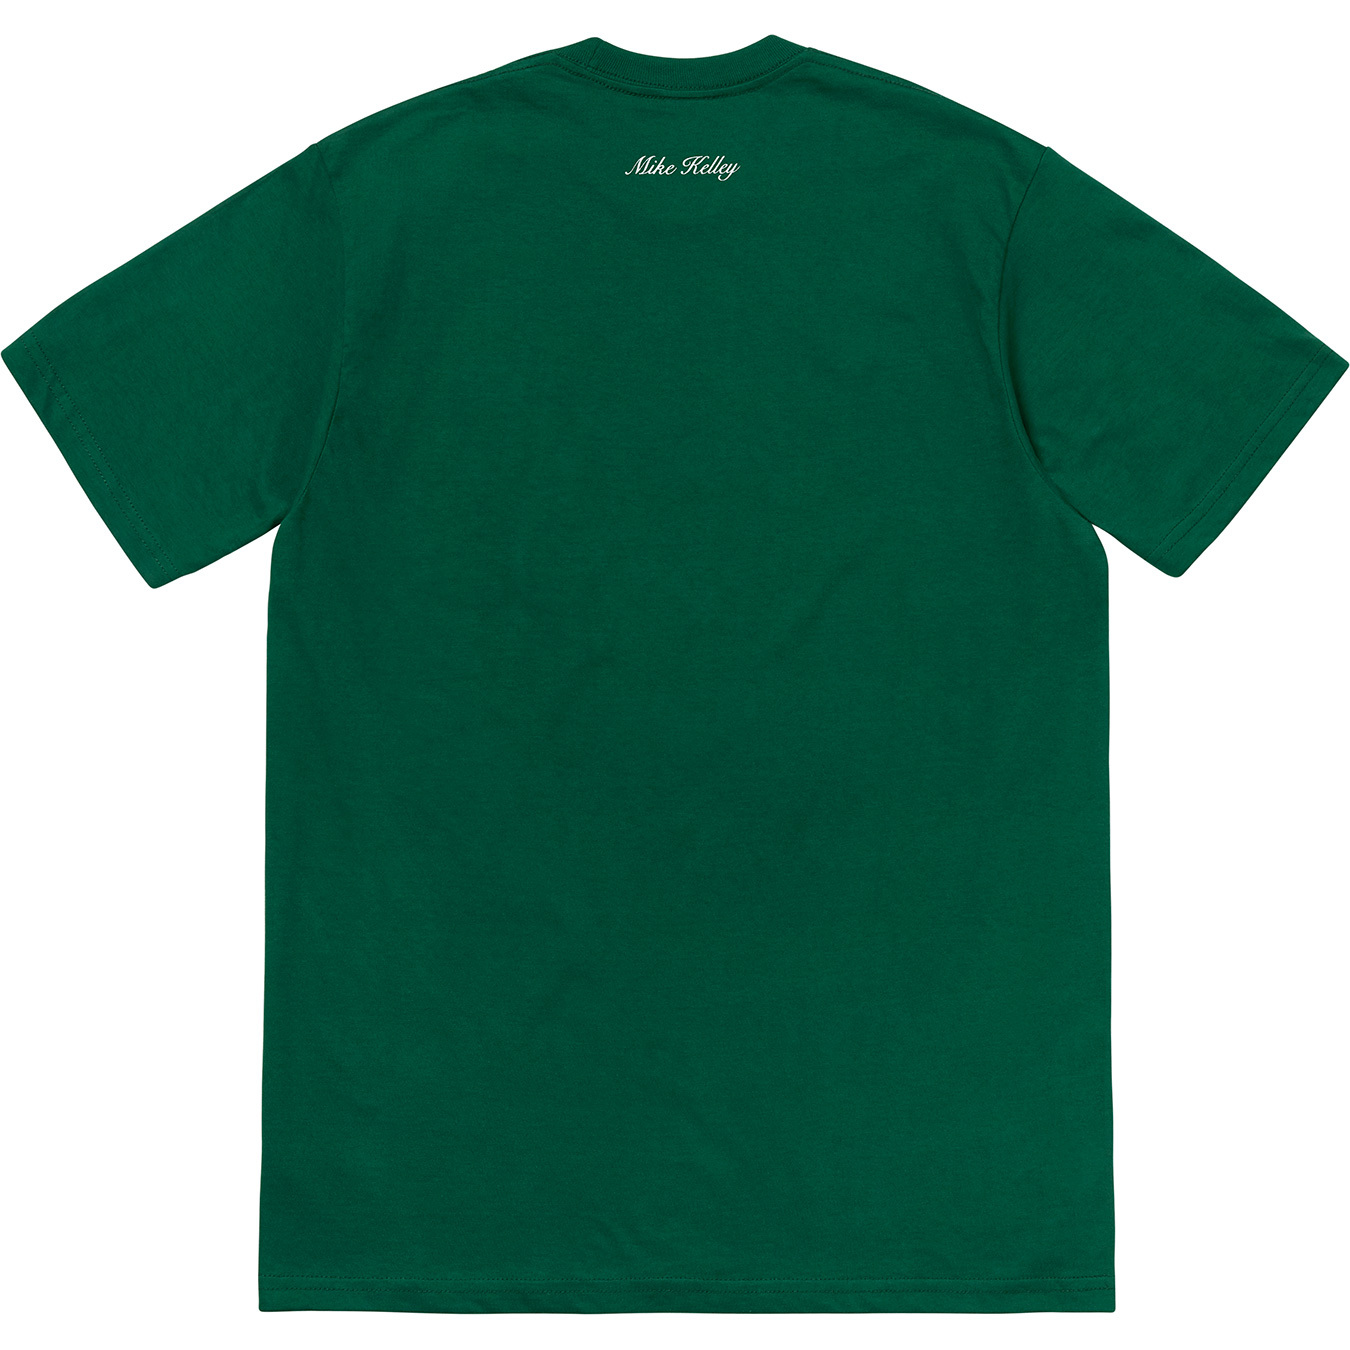 Supreme Mike Kelley The Empire State Building Tee Dark Green